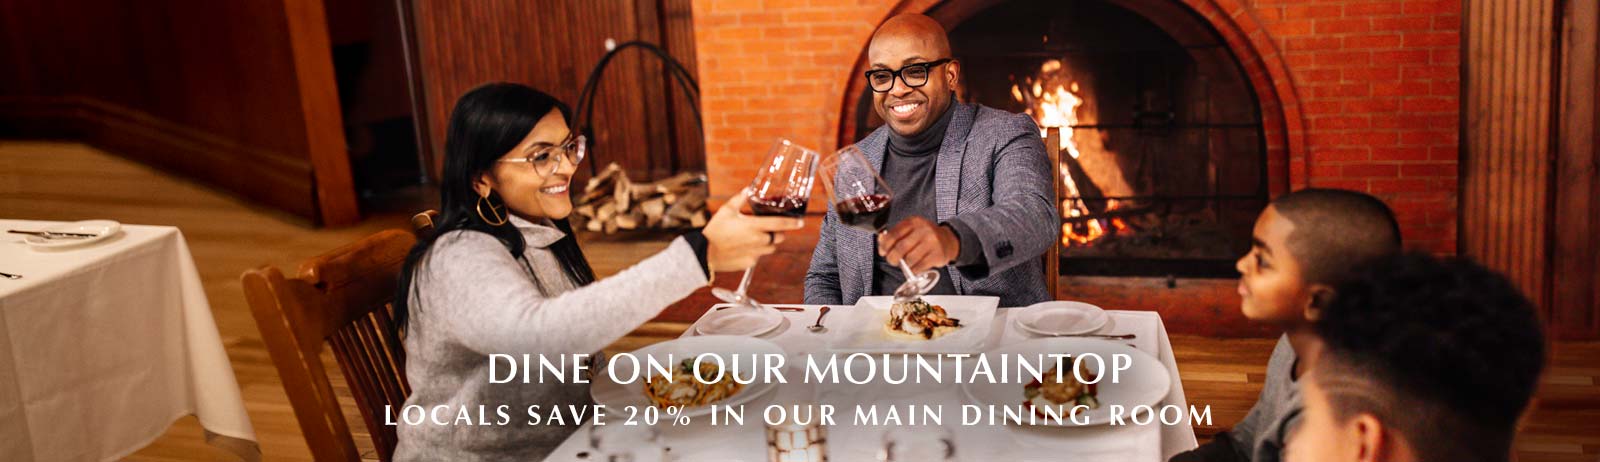 Local Dining Special at Mohonk